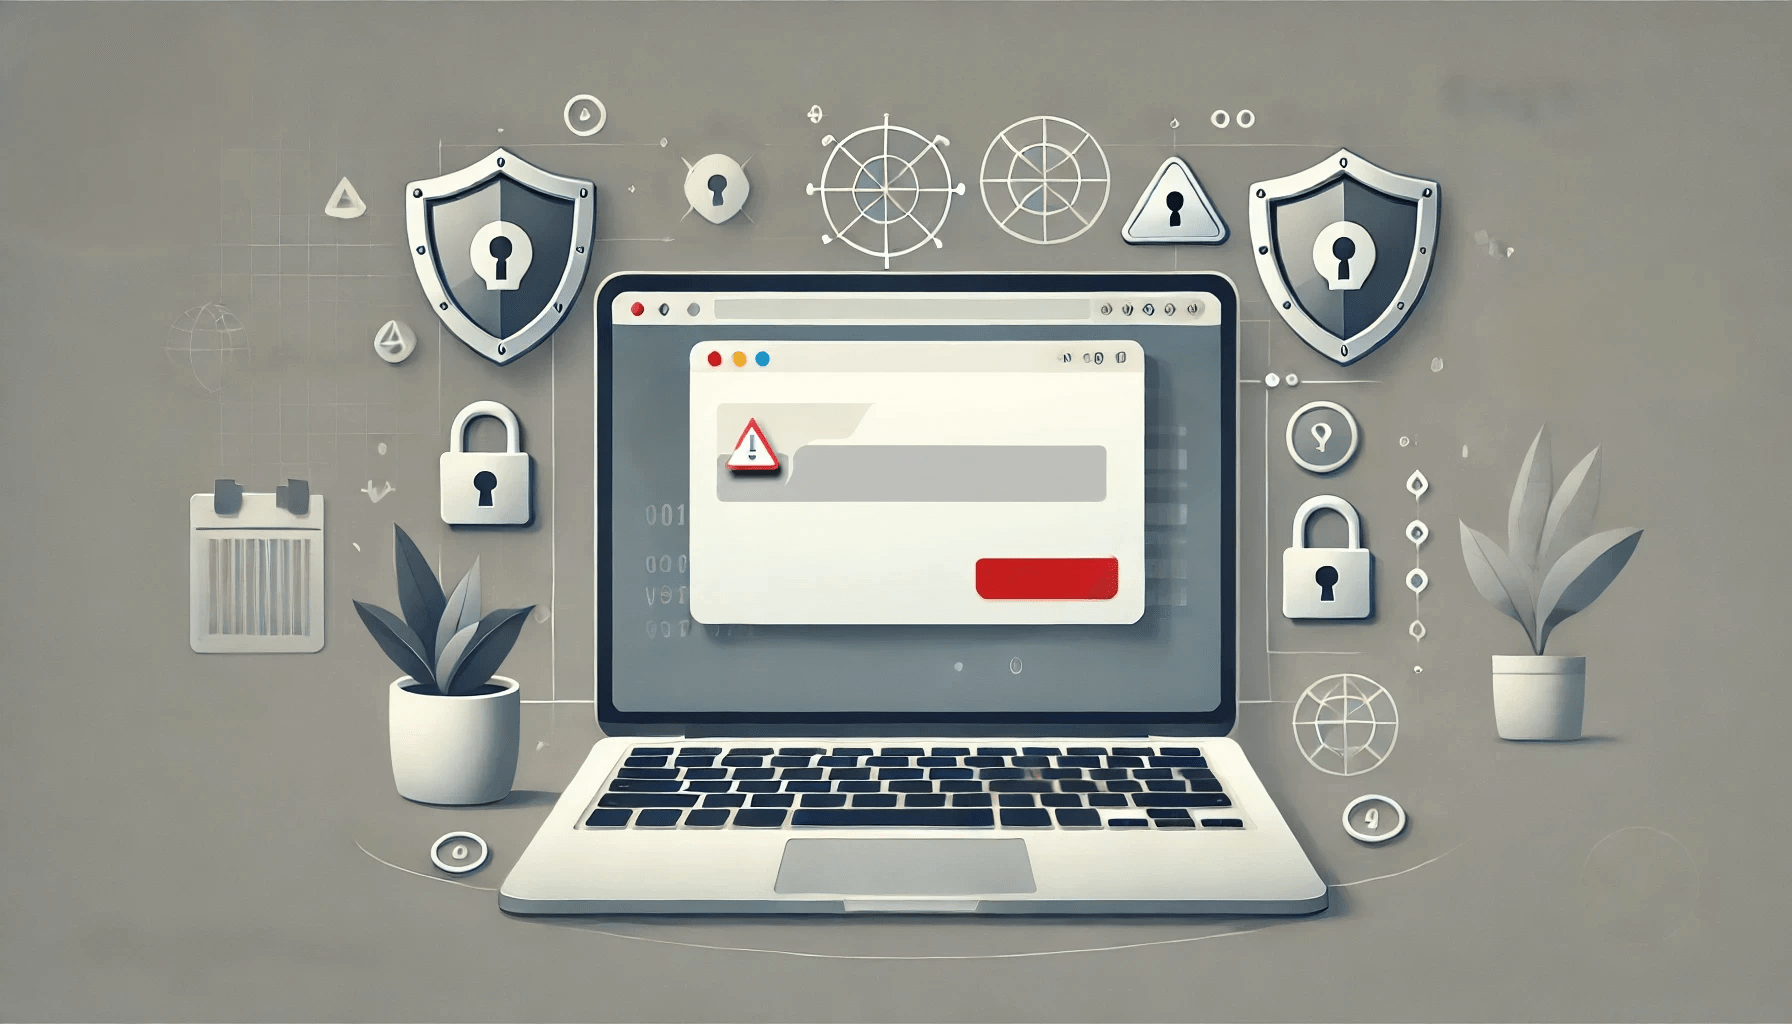 How to Fix the “Your Connection Is Not Private” Error in Google Chrome